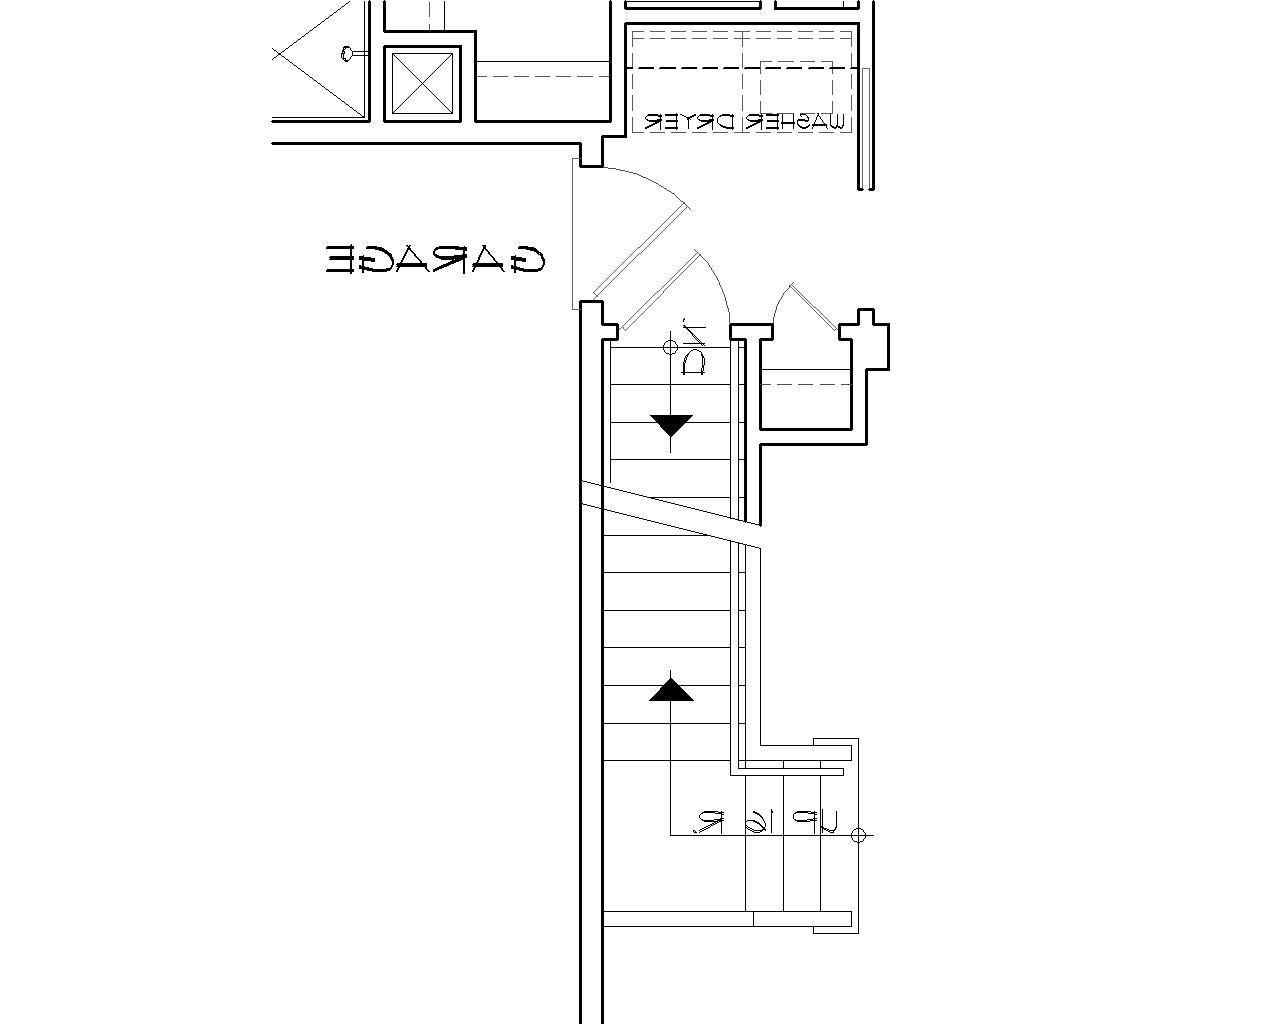 Basement Stair Location image of Griswold House Plan